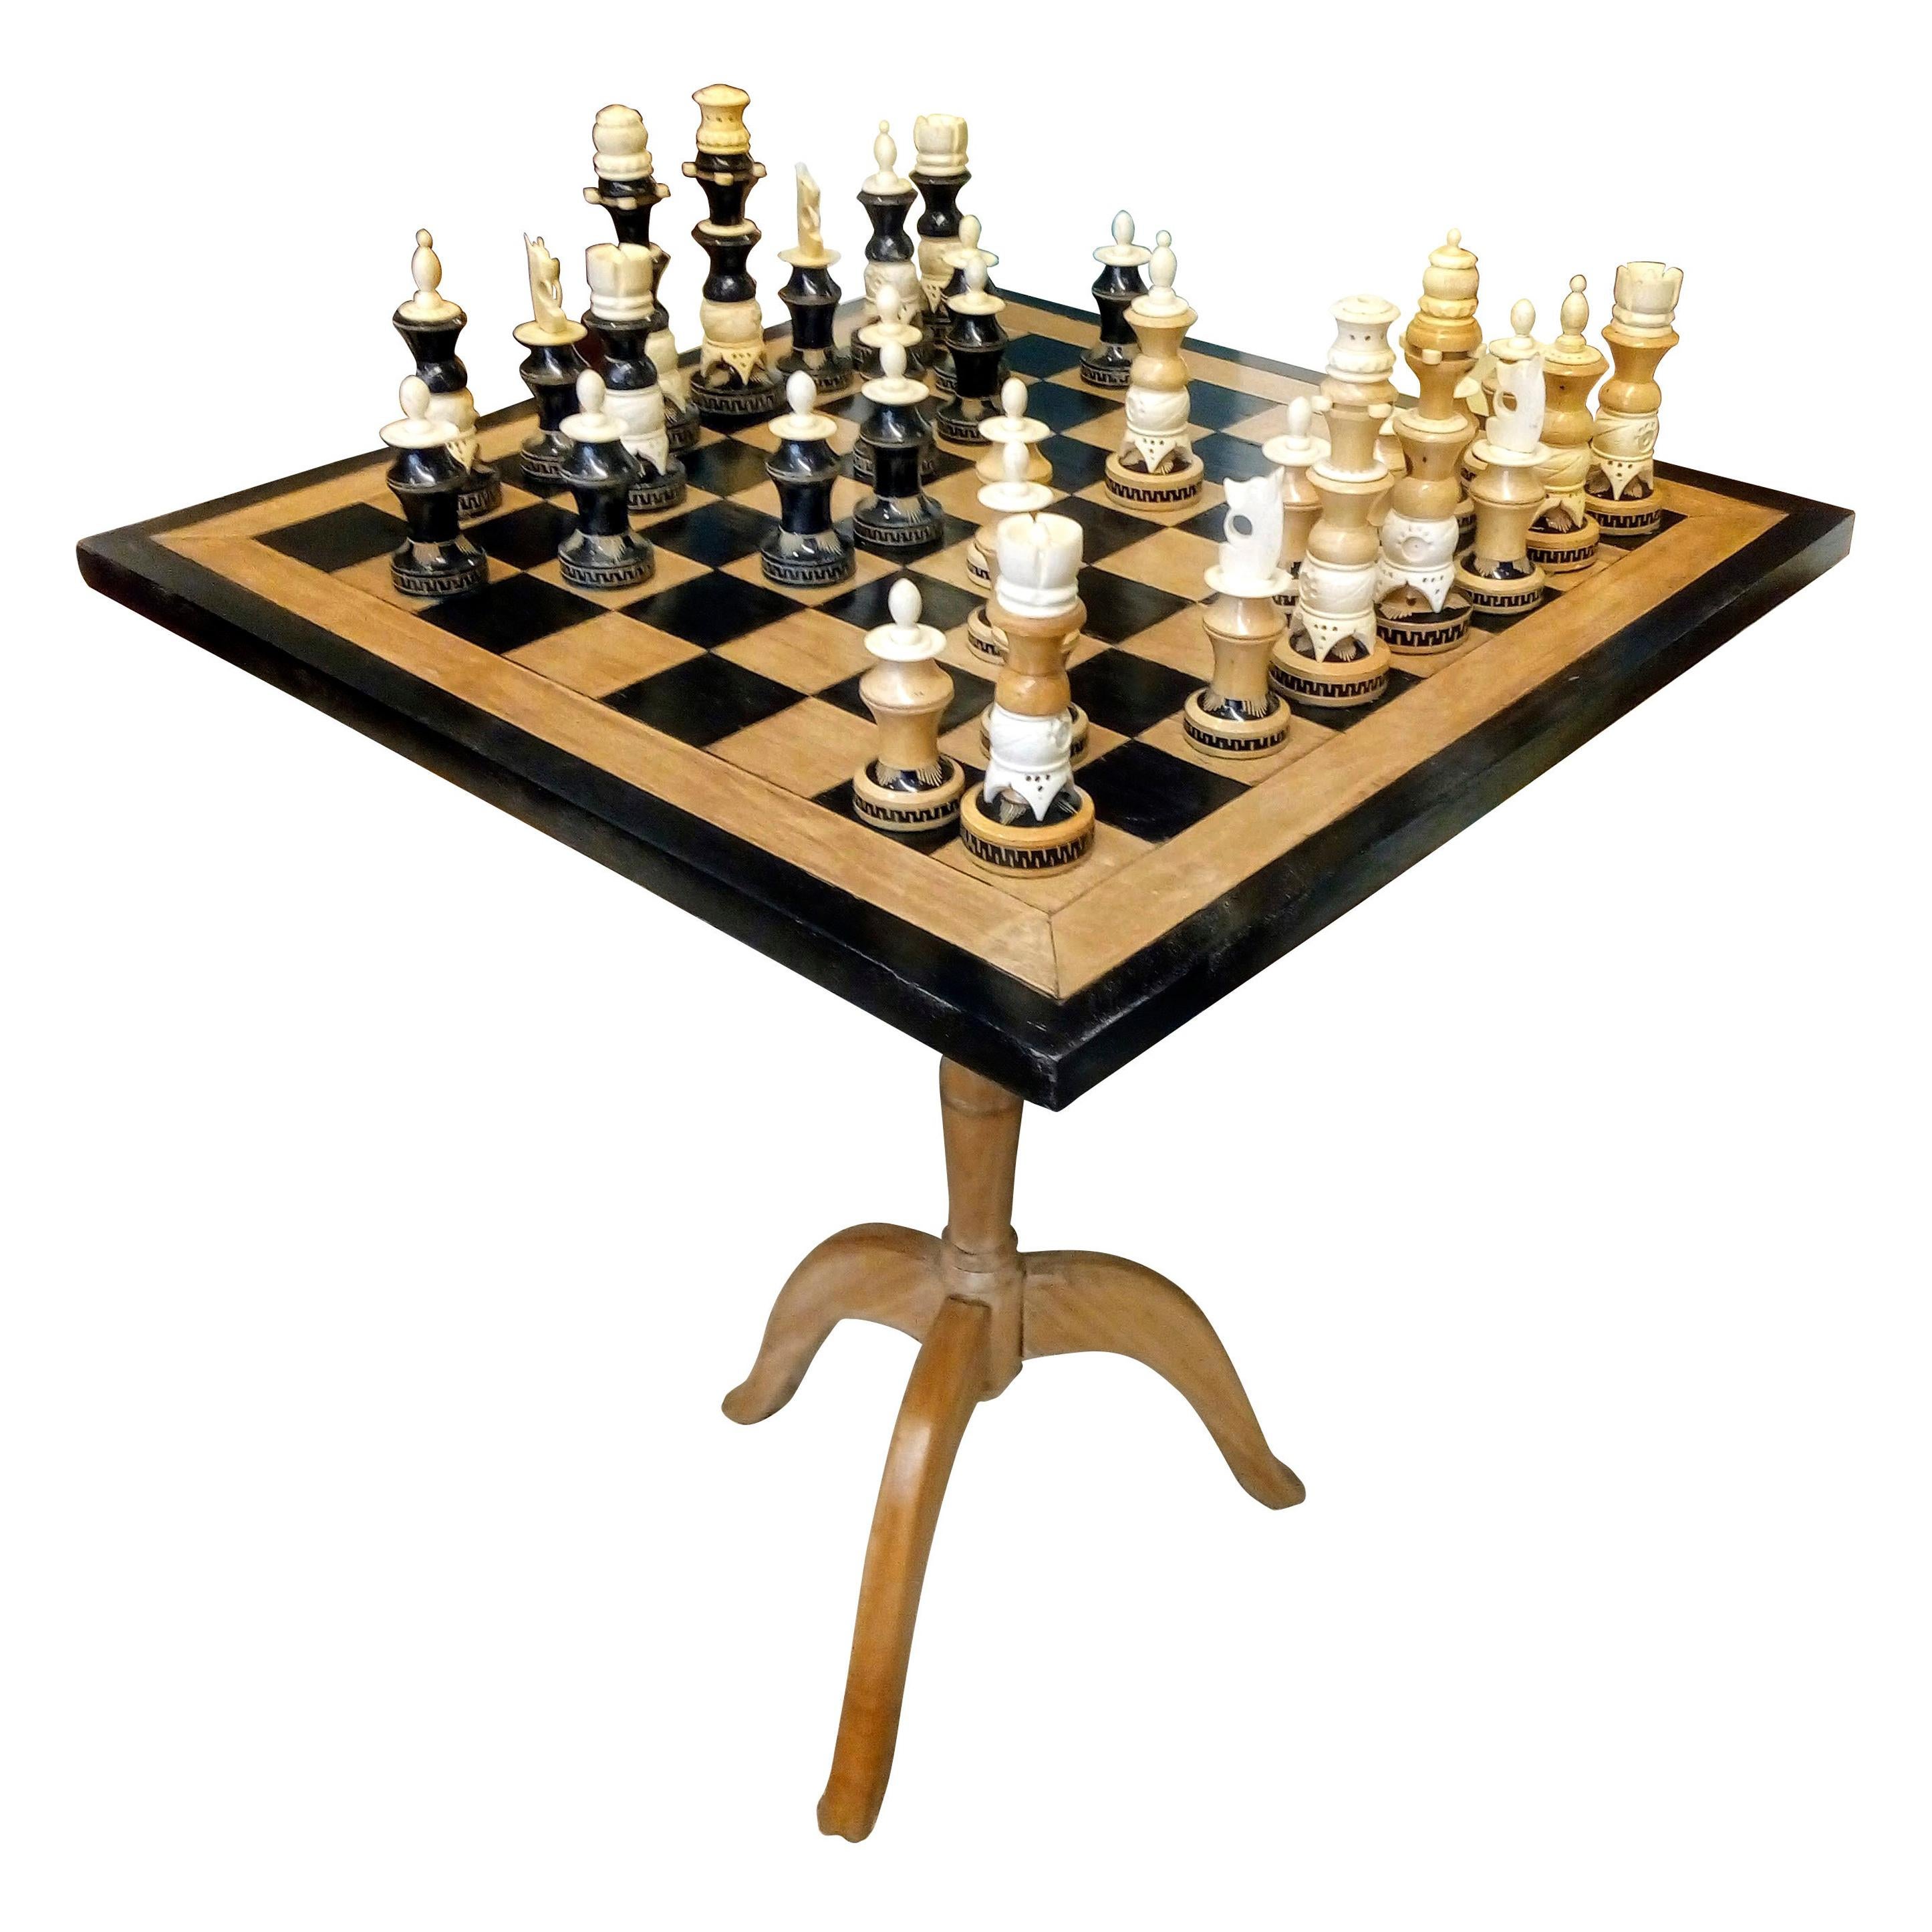 Amazing Chess Set of Handcrafted Wood and Bone Pieces with Table and Board